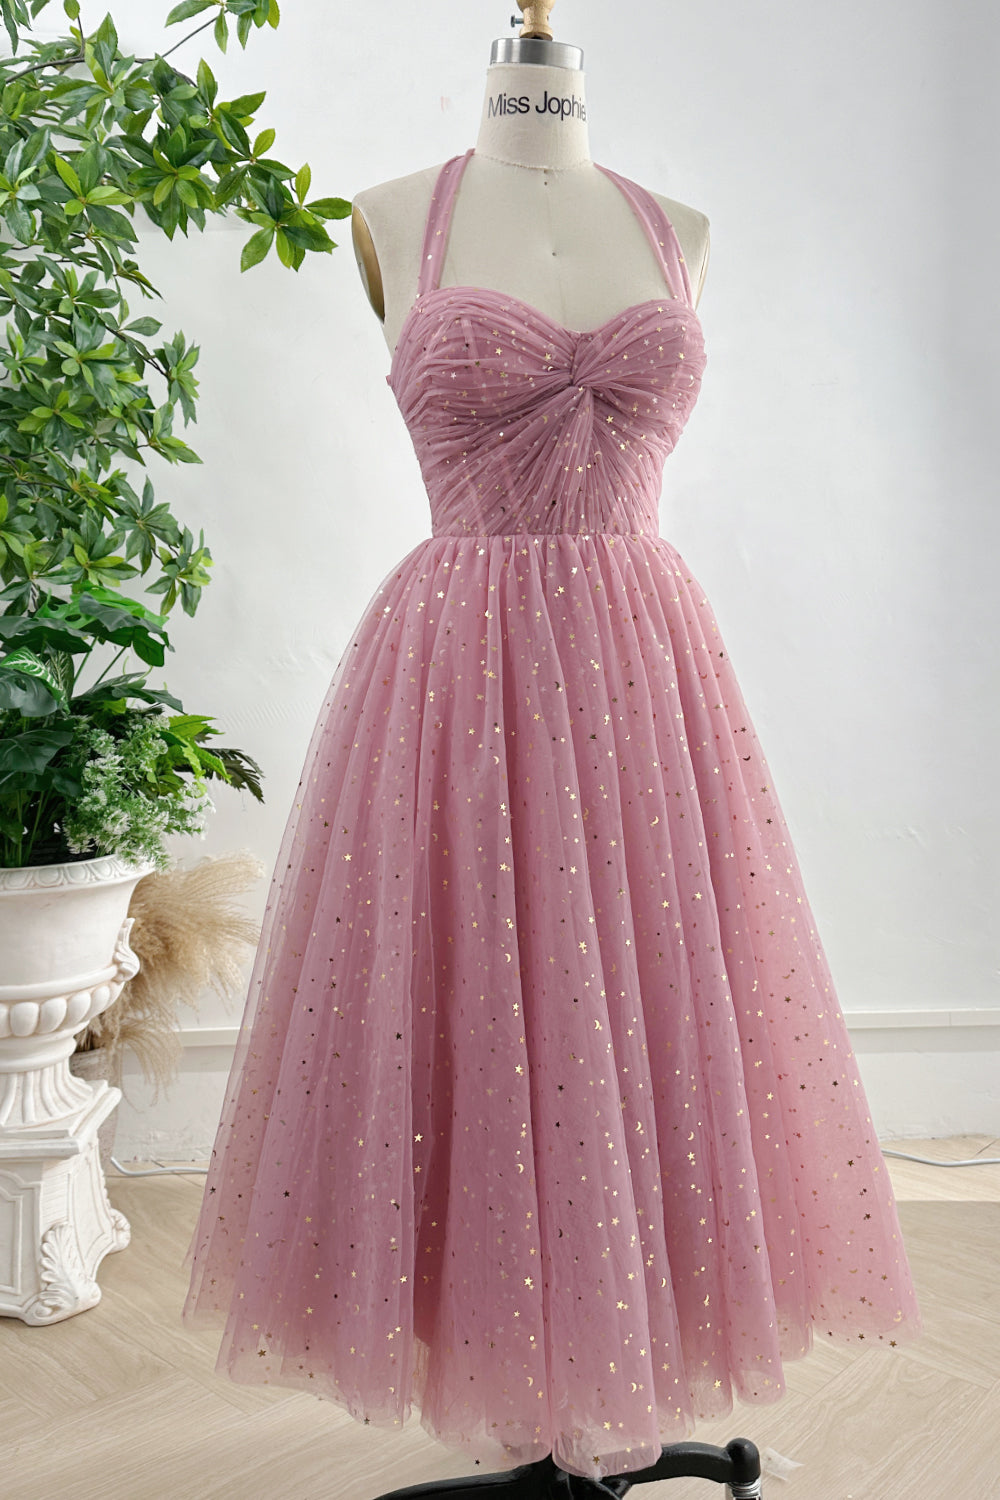 Sweetheart Corset Dusty Rose Dress with Removable Tie Straps